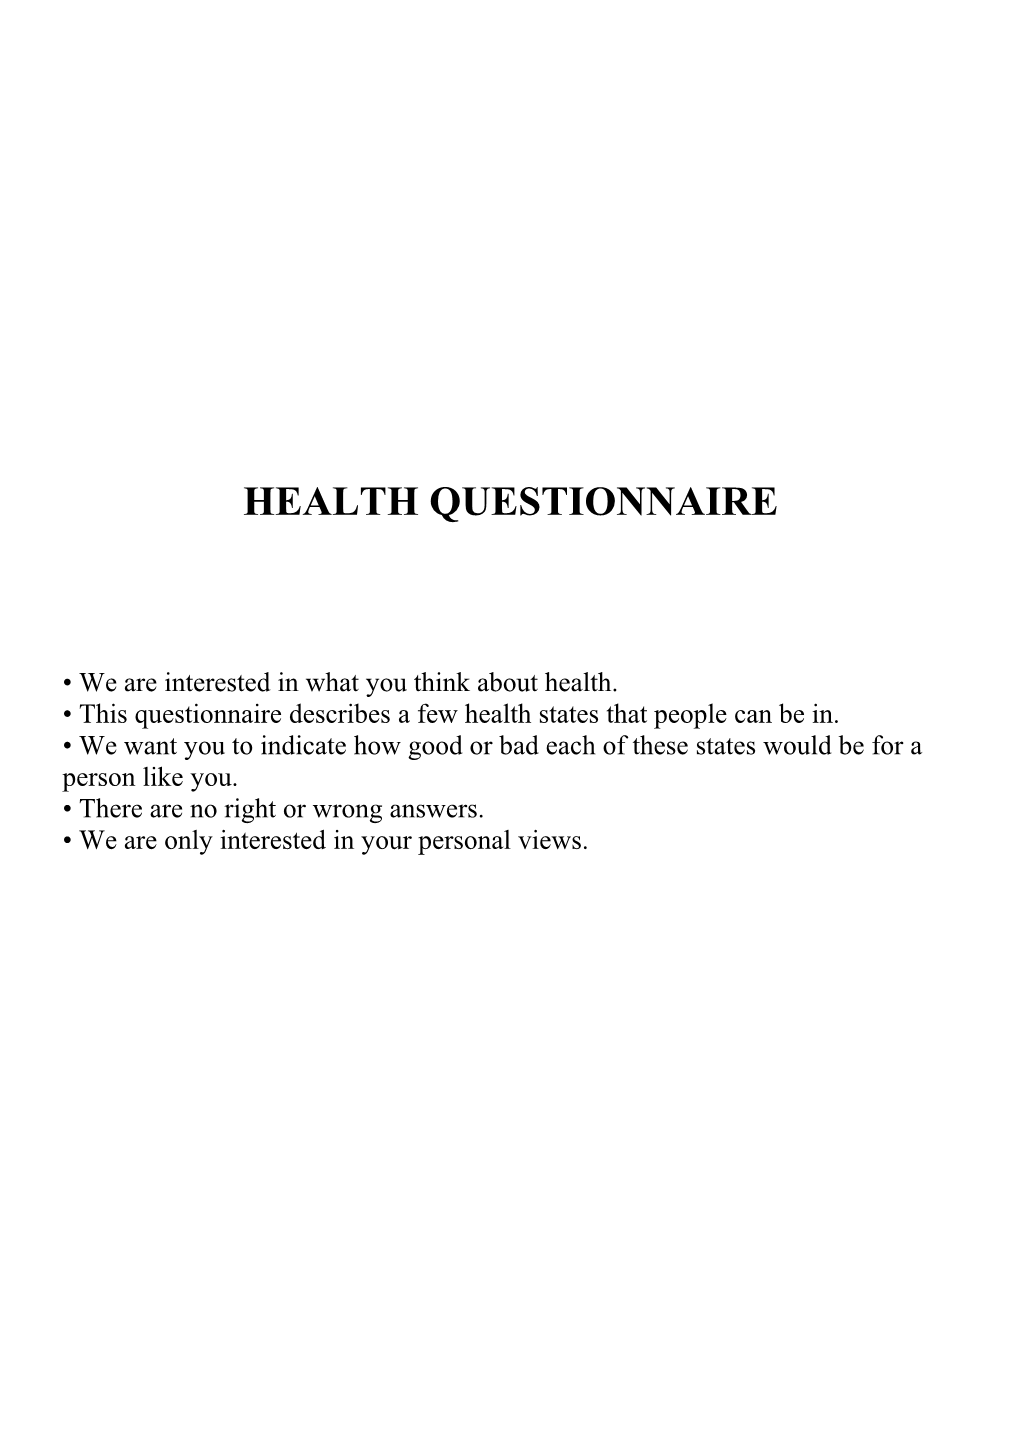 Health Questionnaire (Visual Analogue Scale)